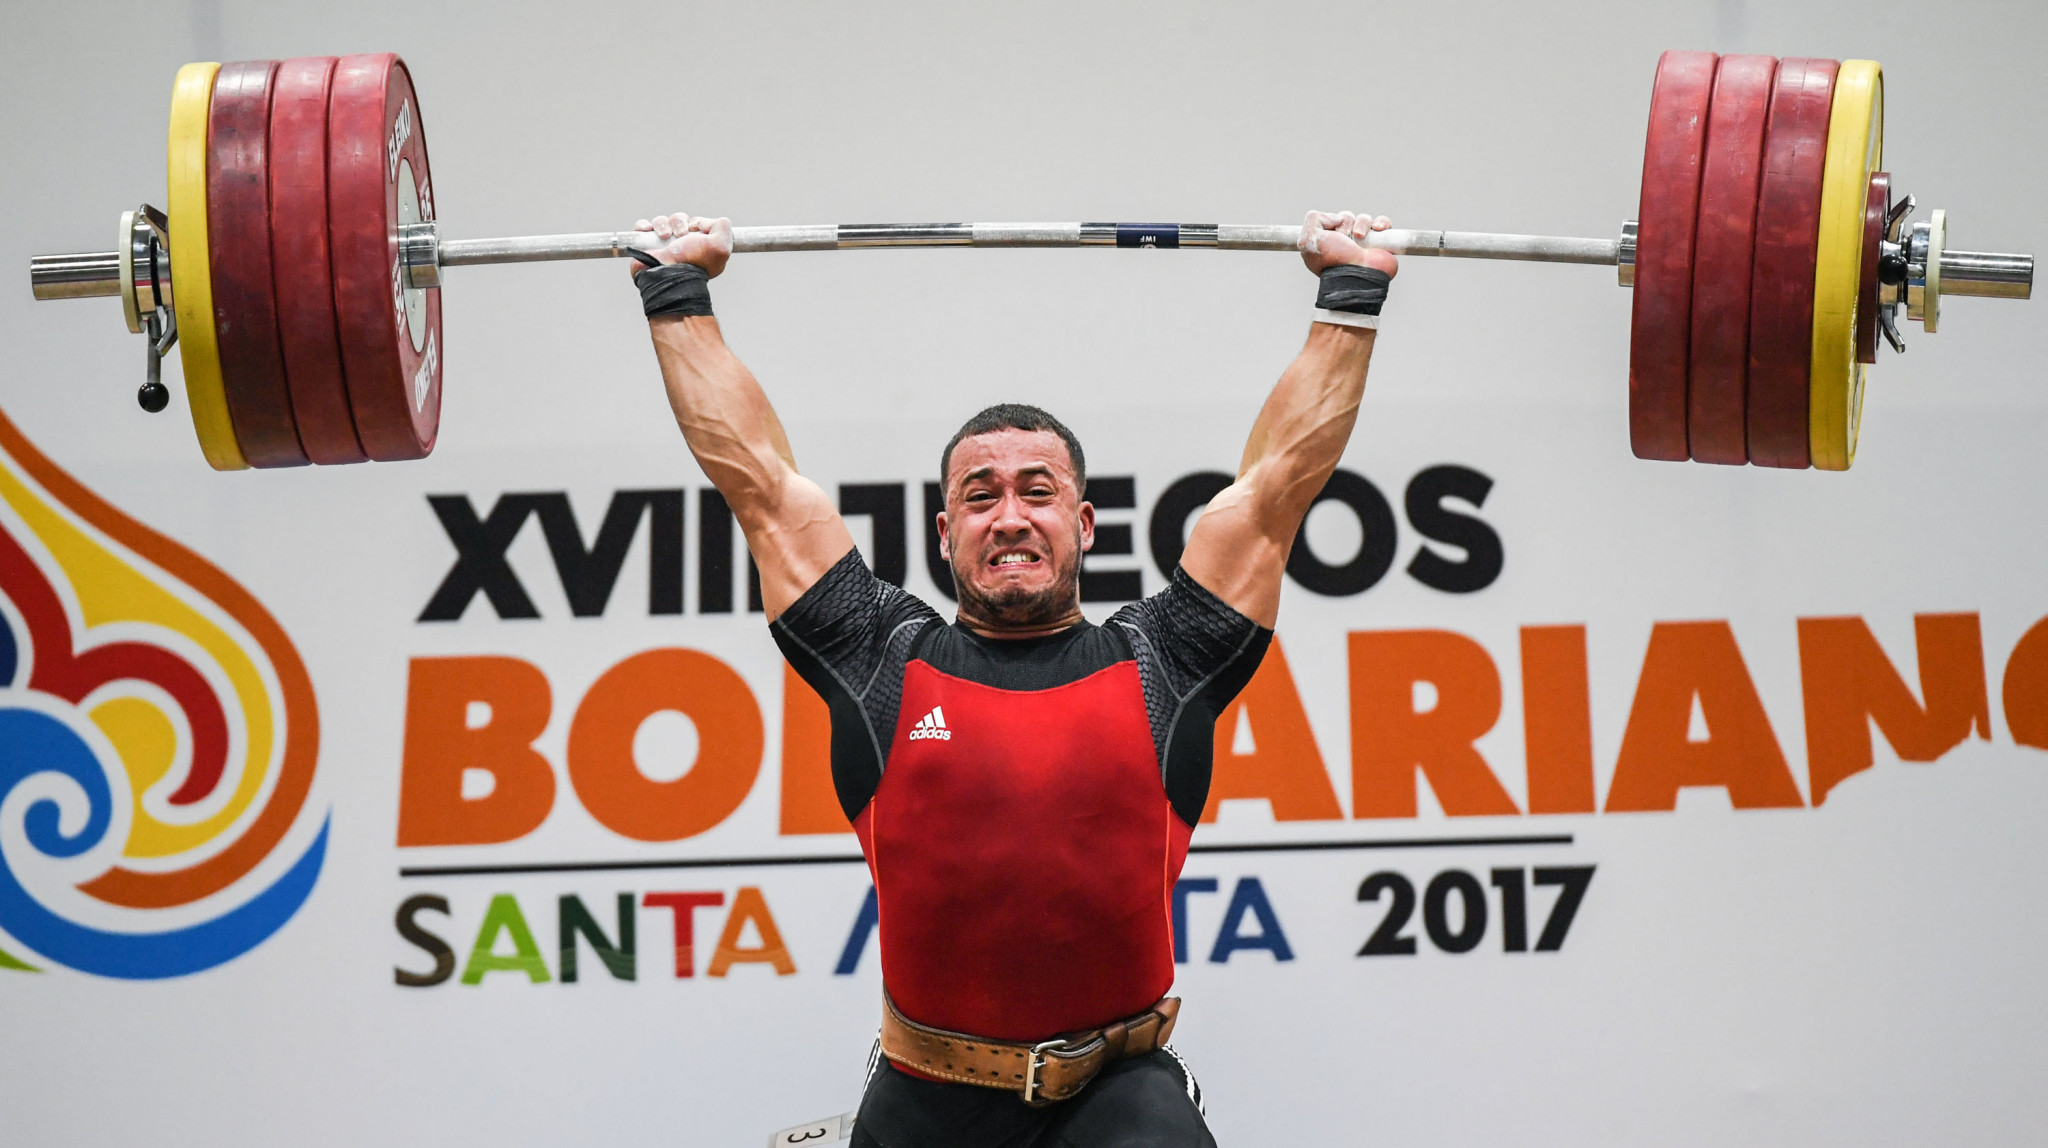 World champion weightlifter’s Olympic place under threat after cannabis positive